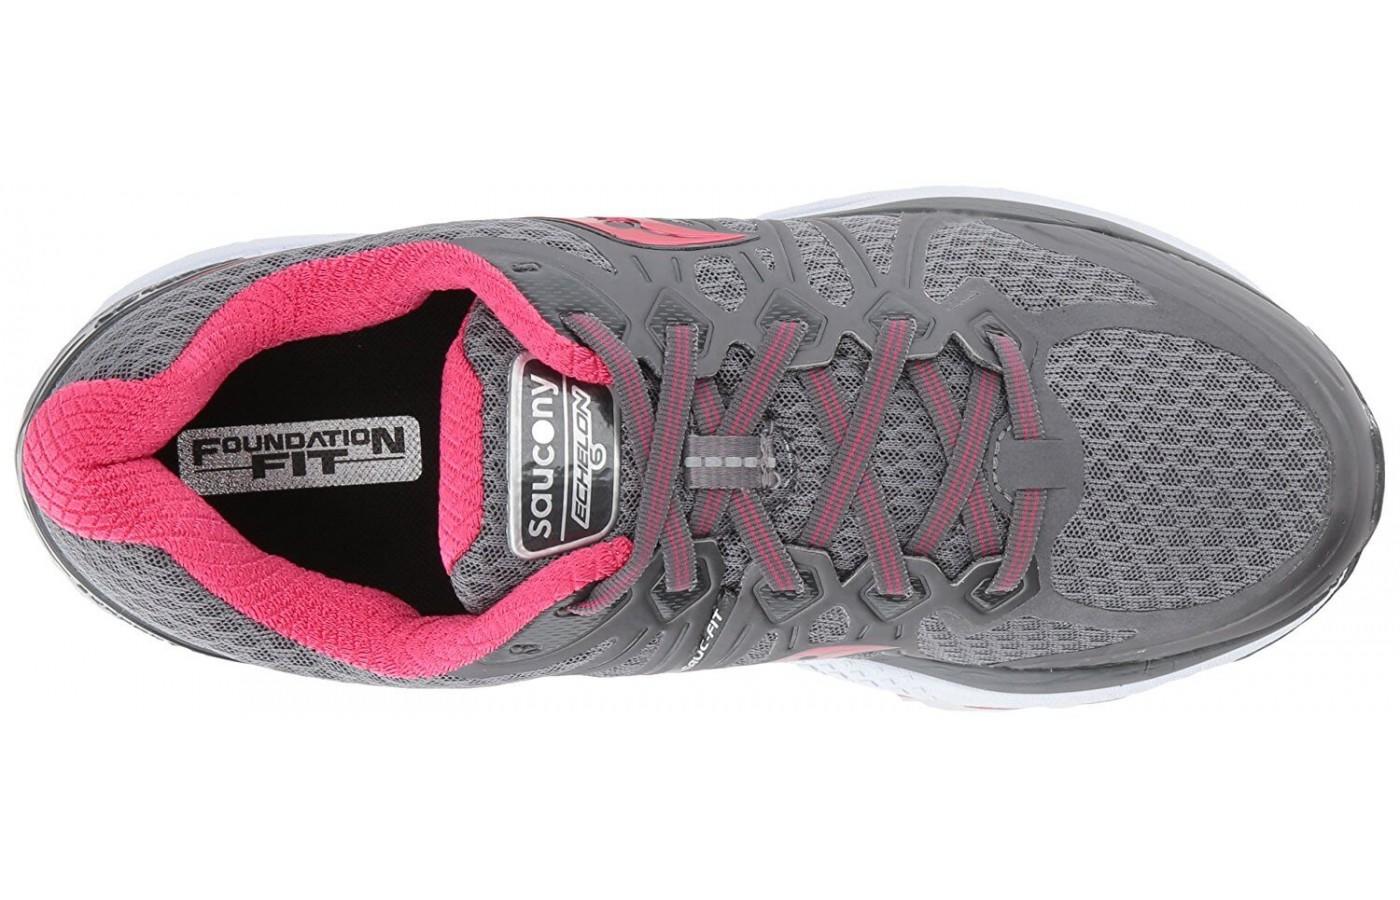 The upper of the Saucony Echelon 6 is designed for wide and narrow foot types